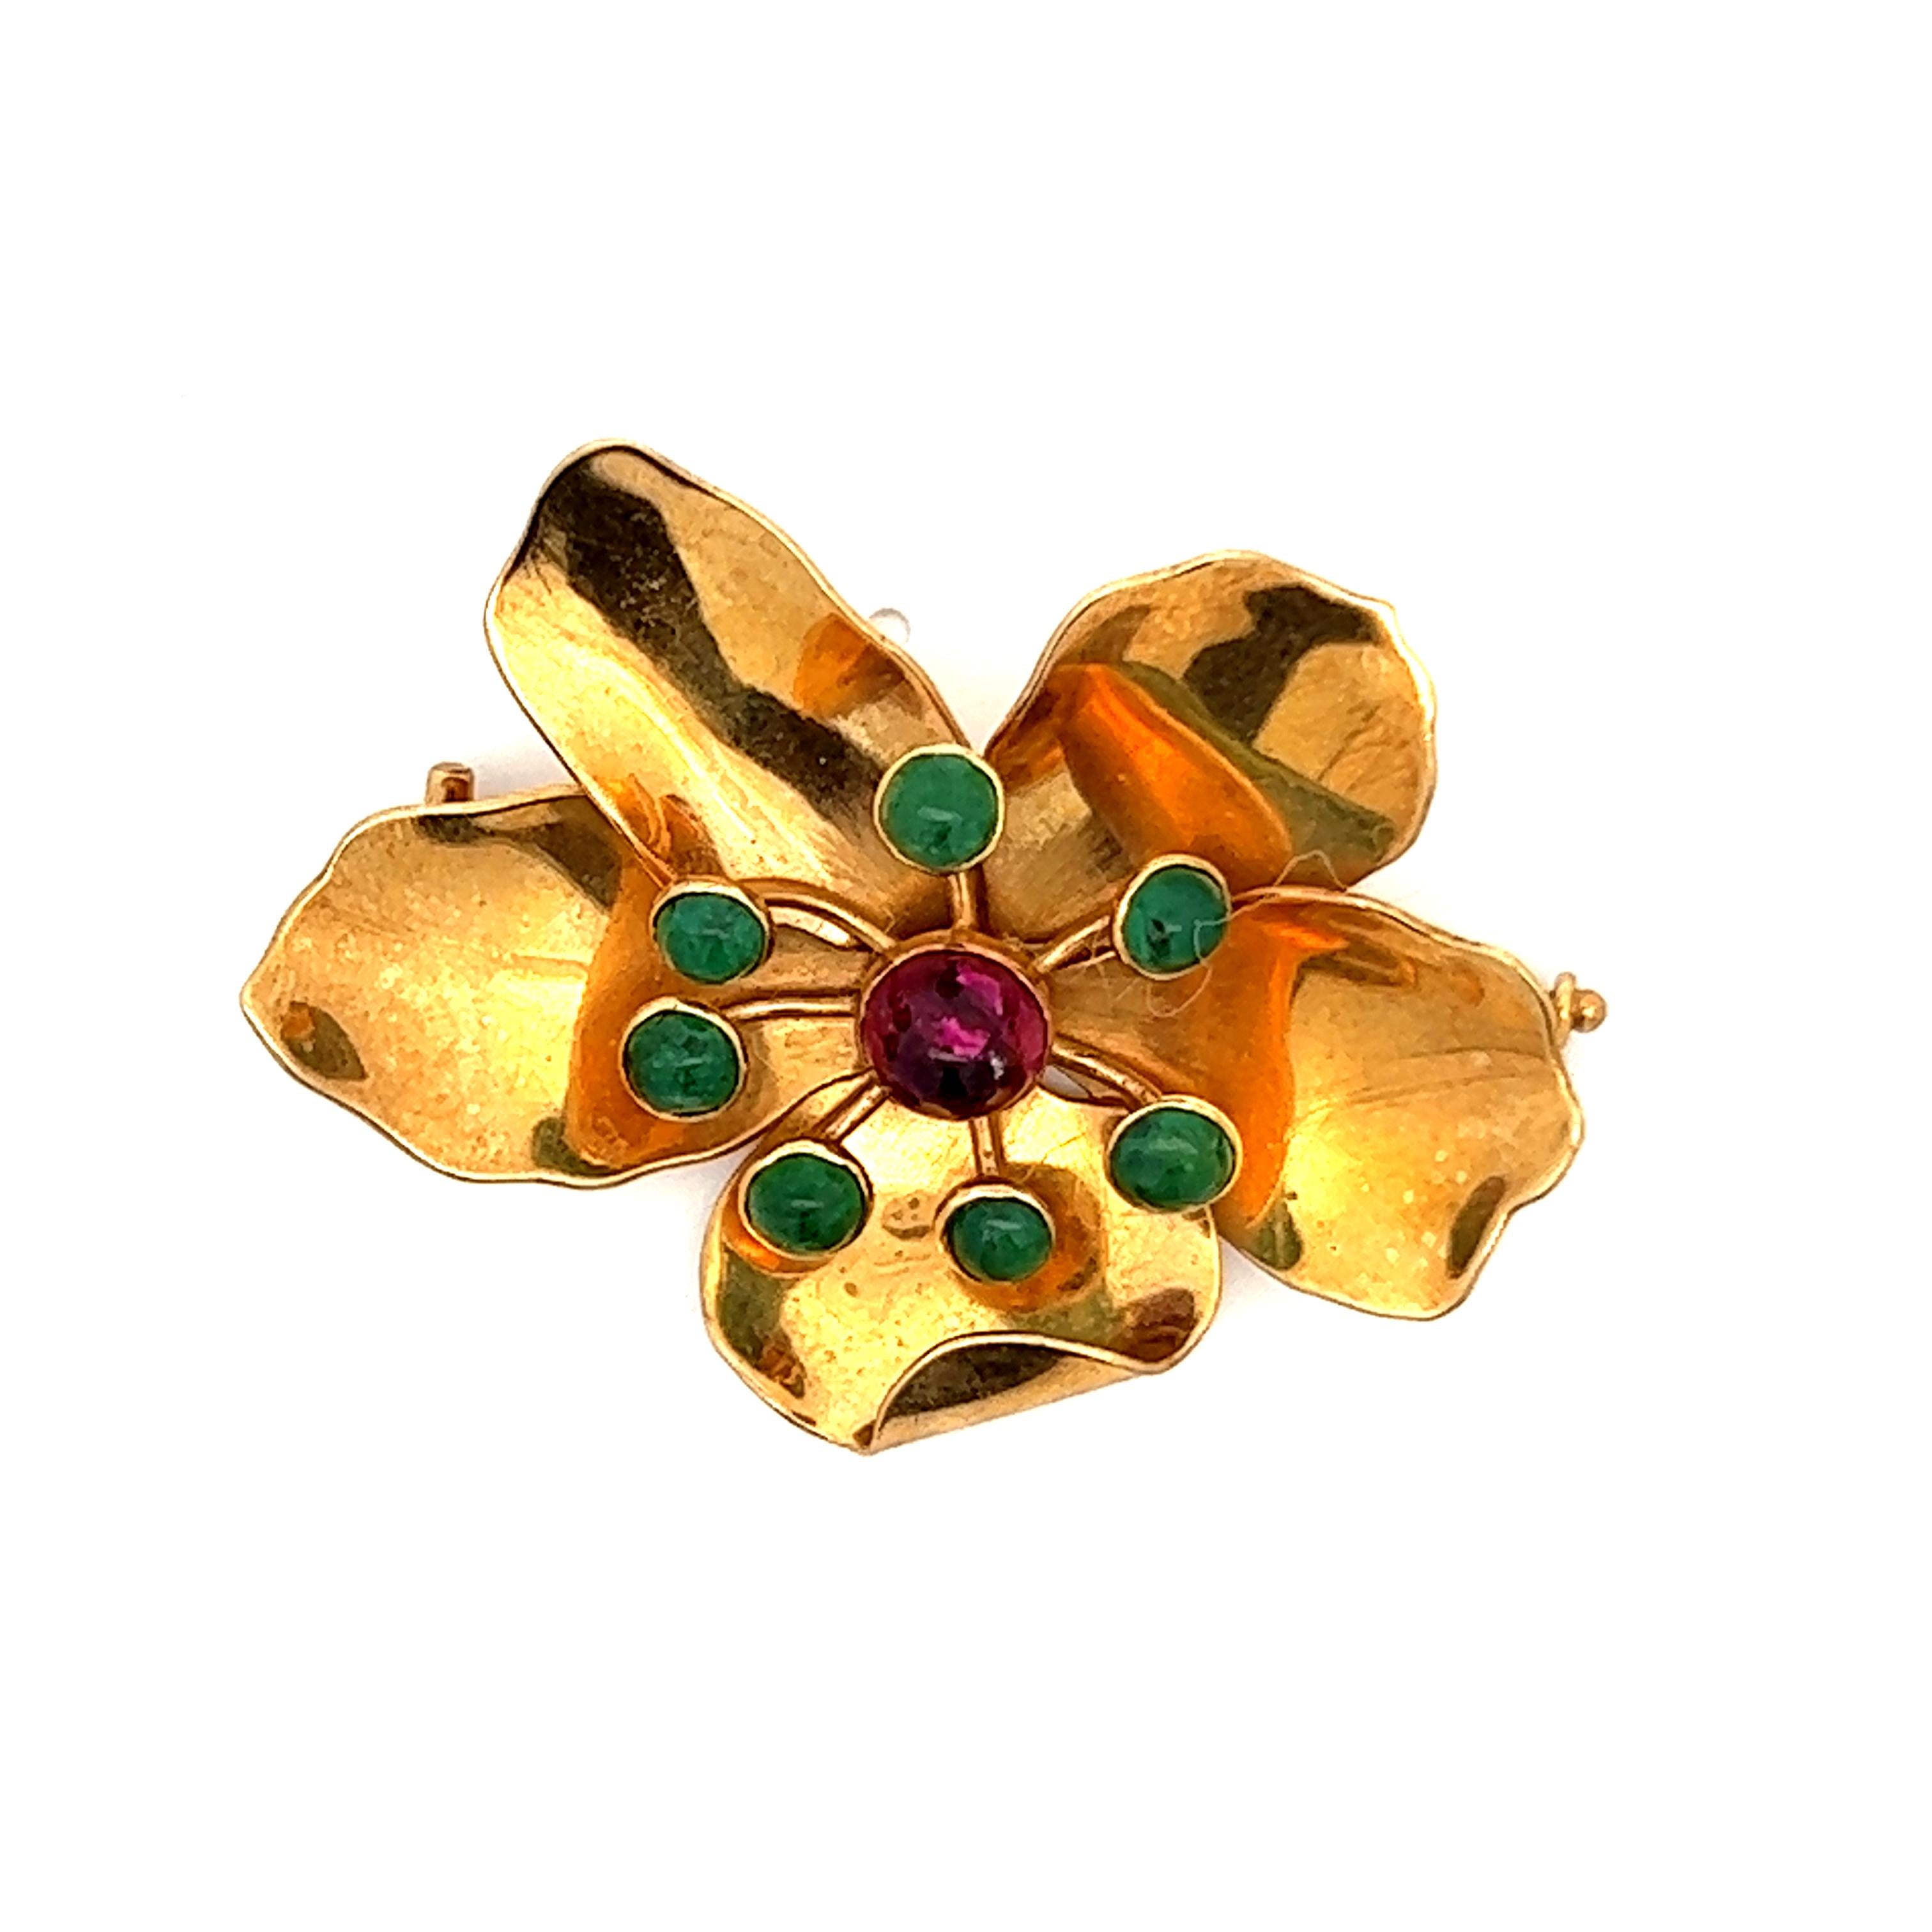 This is a lovely Mic Neugel hyper realistic tourmaline and emerald cabochon statement pin. The pin is handmade and features incredible detail making the leaf appear ultra realistic and life like. The pin is made in 18k yellow gold and is in